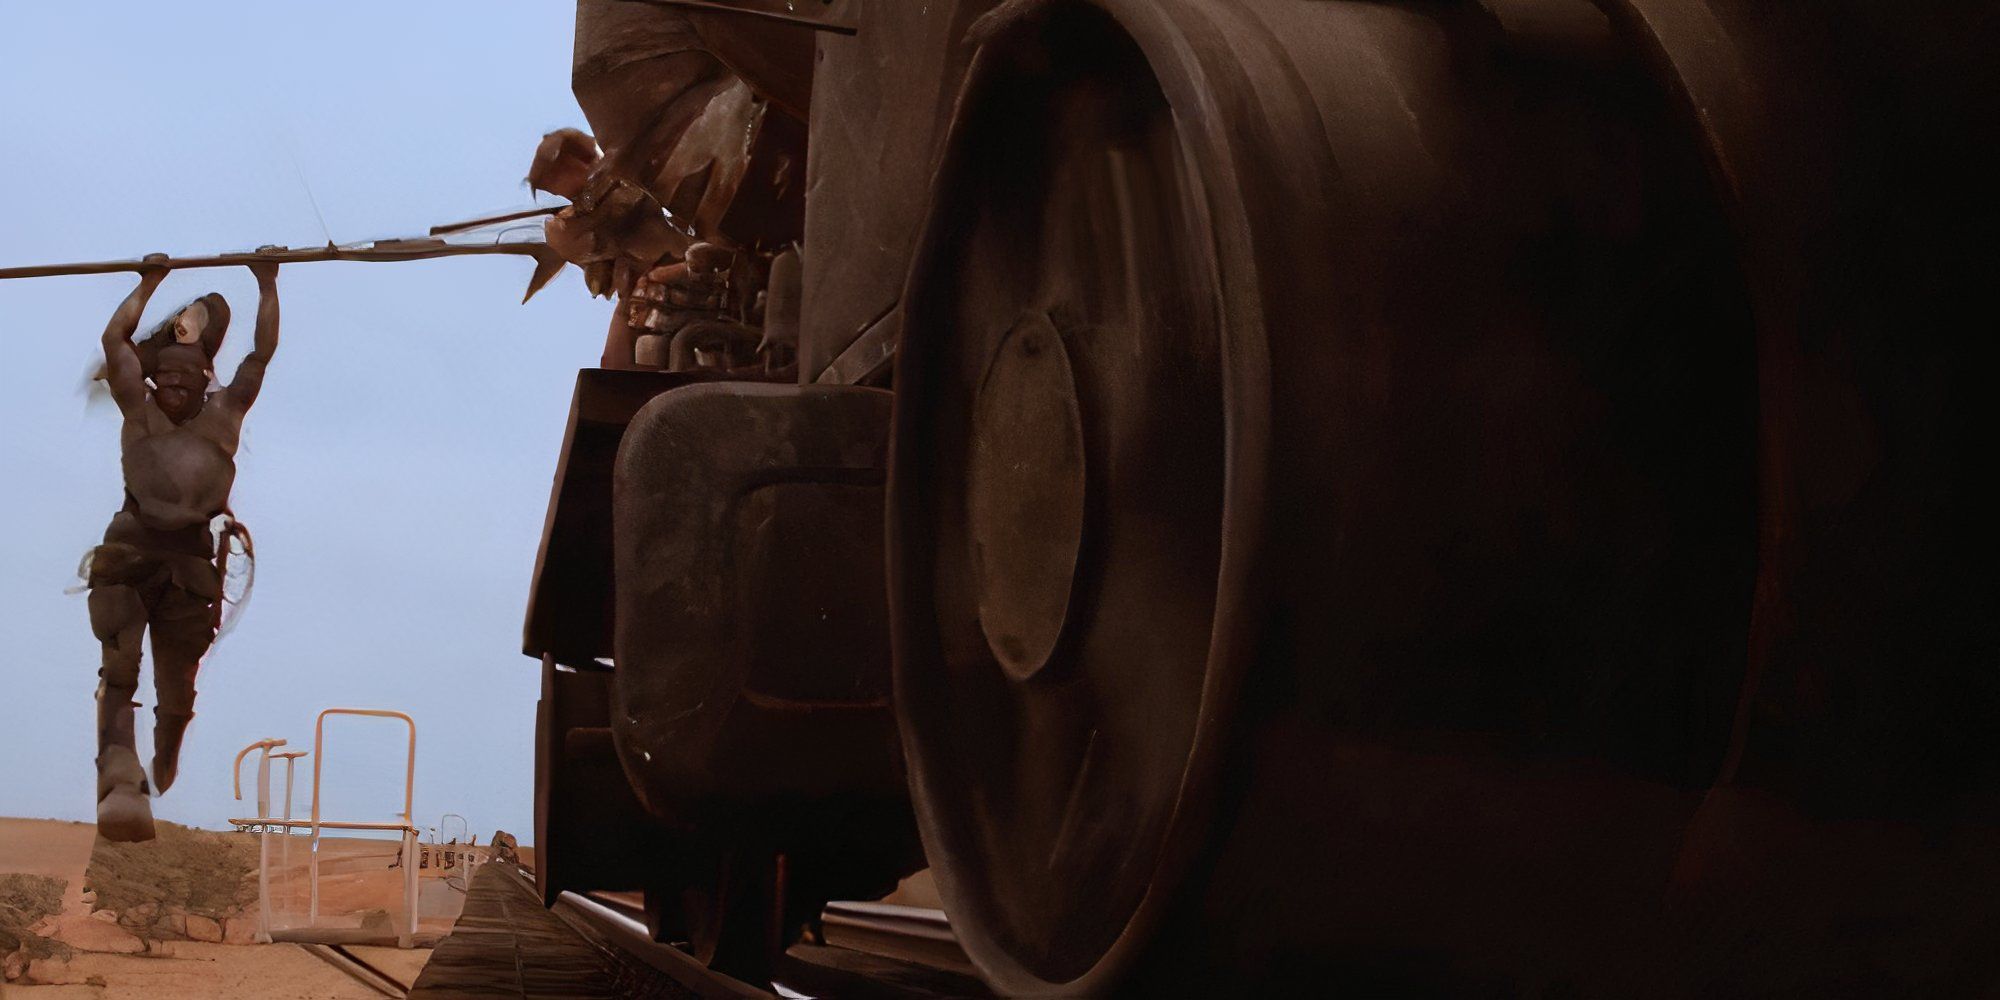 Ironbar hanging onto a car in Mad Max Beyond Thunderdome